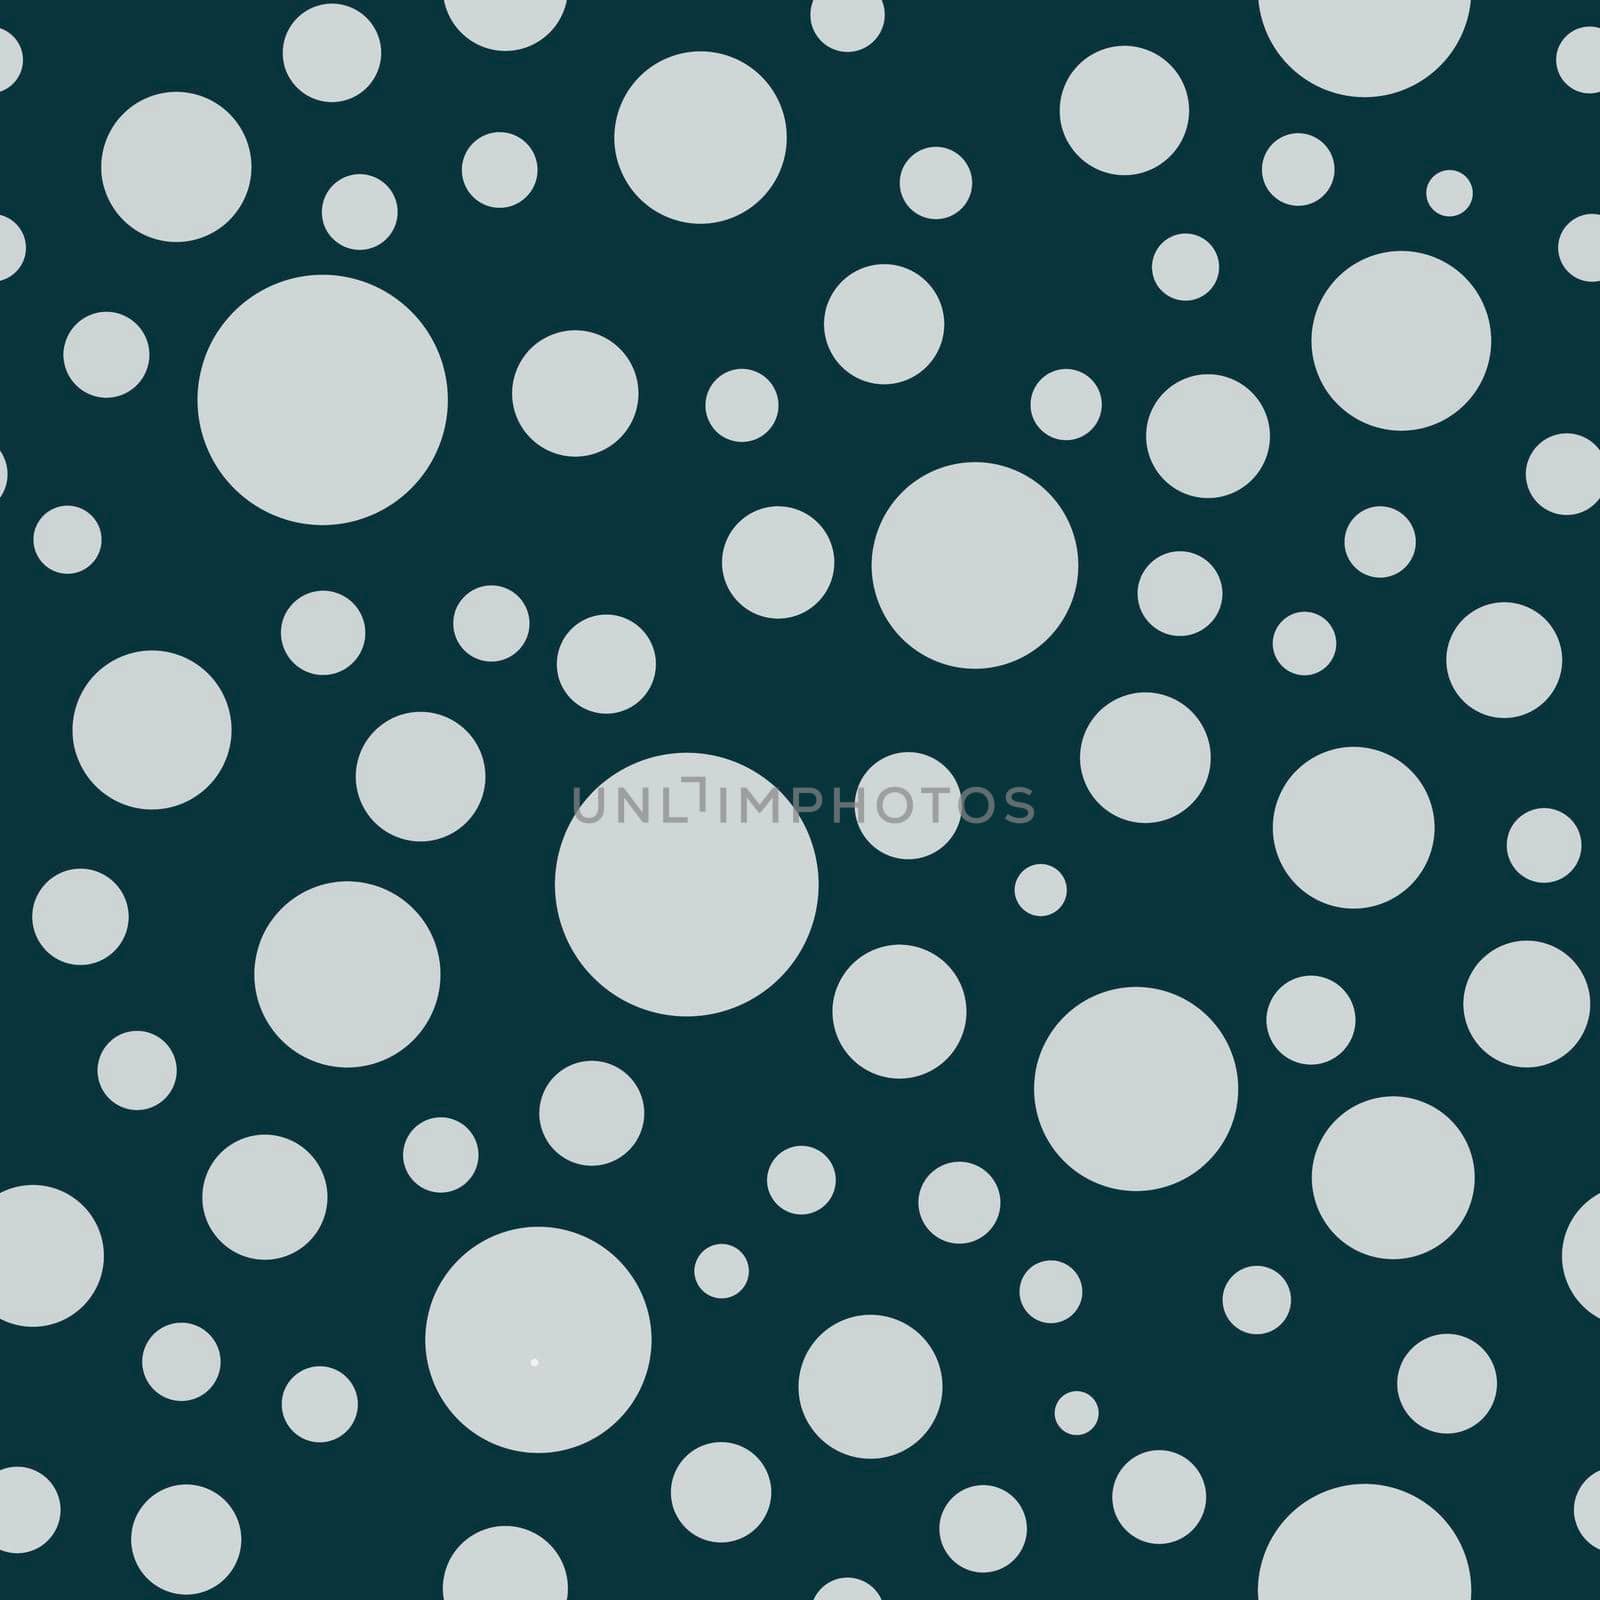 Abstract seamless pattern with monochrome balls.Illustration of dots pattern for background abstract.Polka dots ornament.Good for invitation,poster,card,flyer,banner,textile,fabric,gift wrapping paper by Angelsmoon